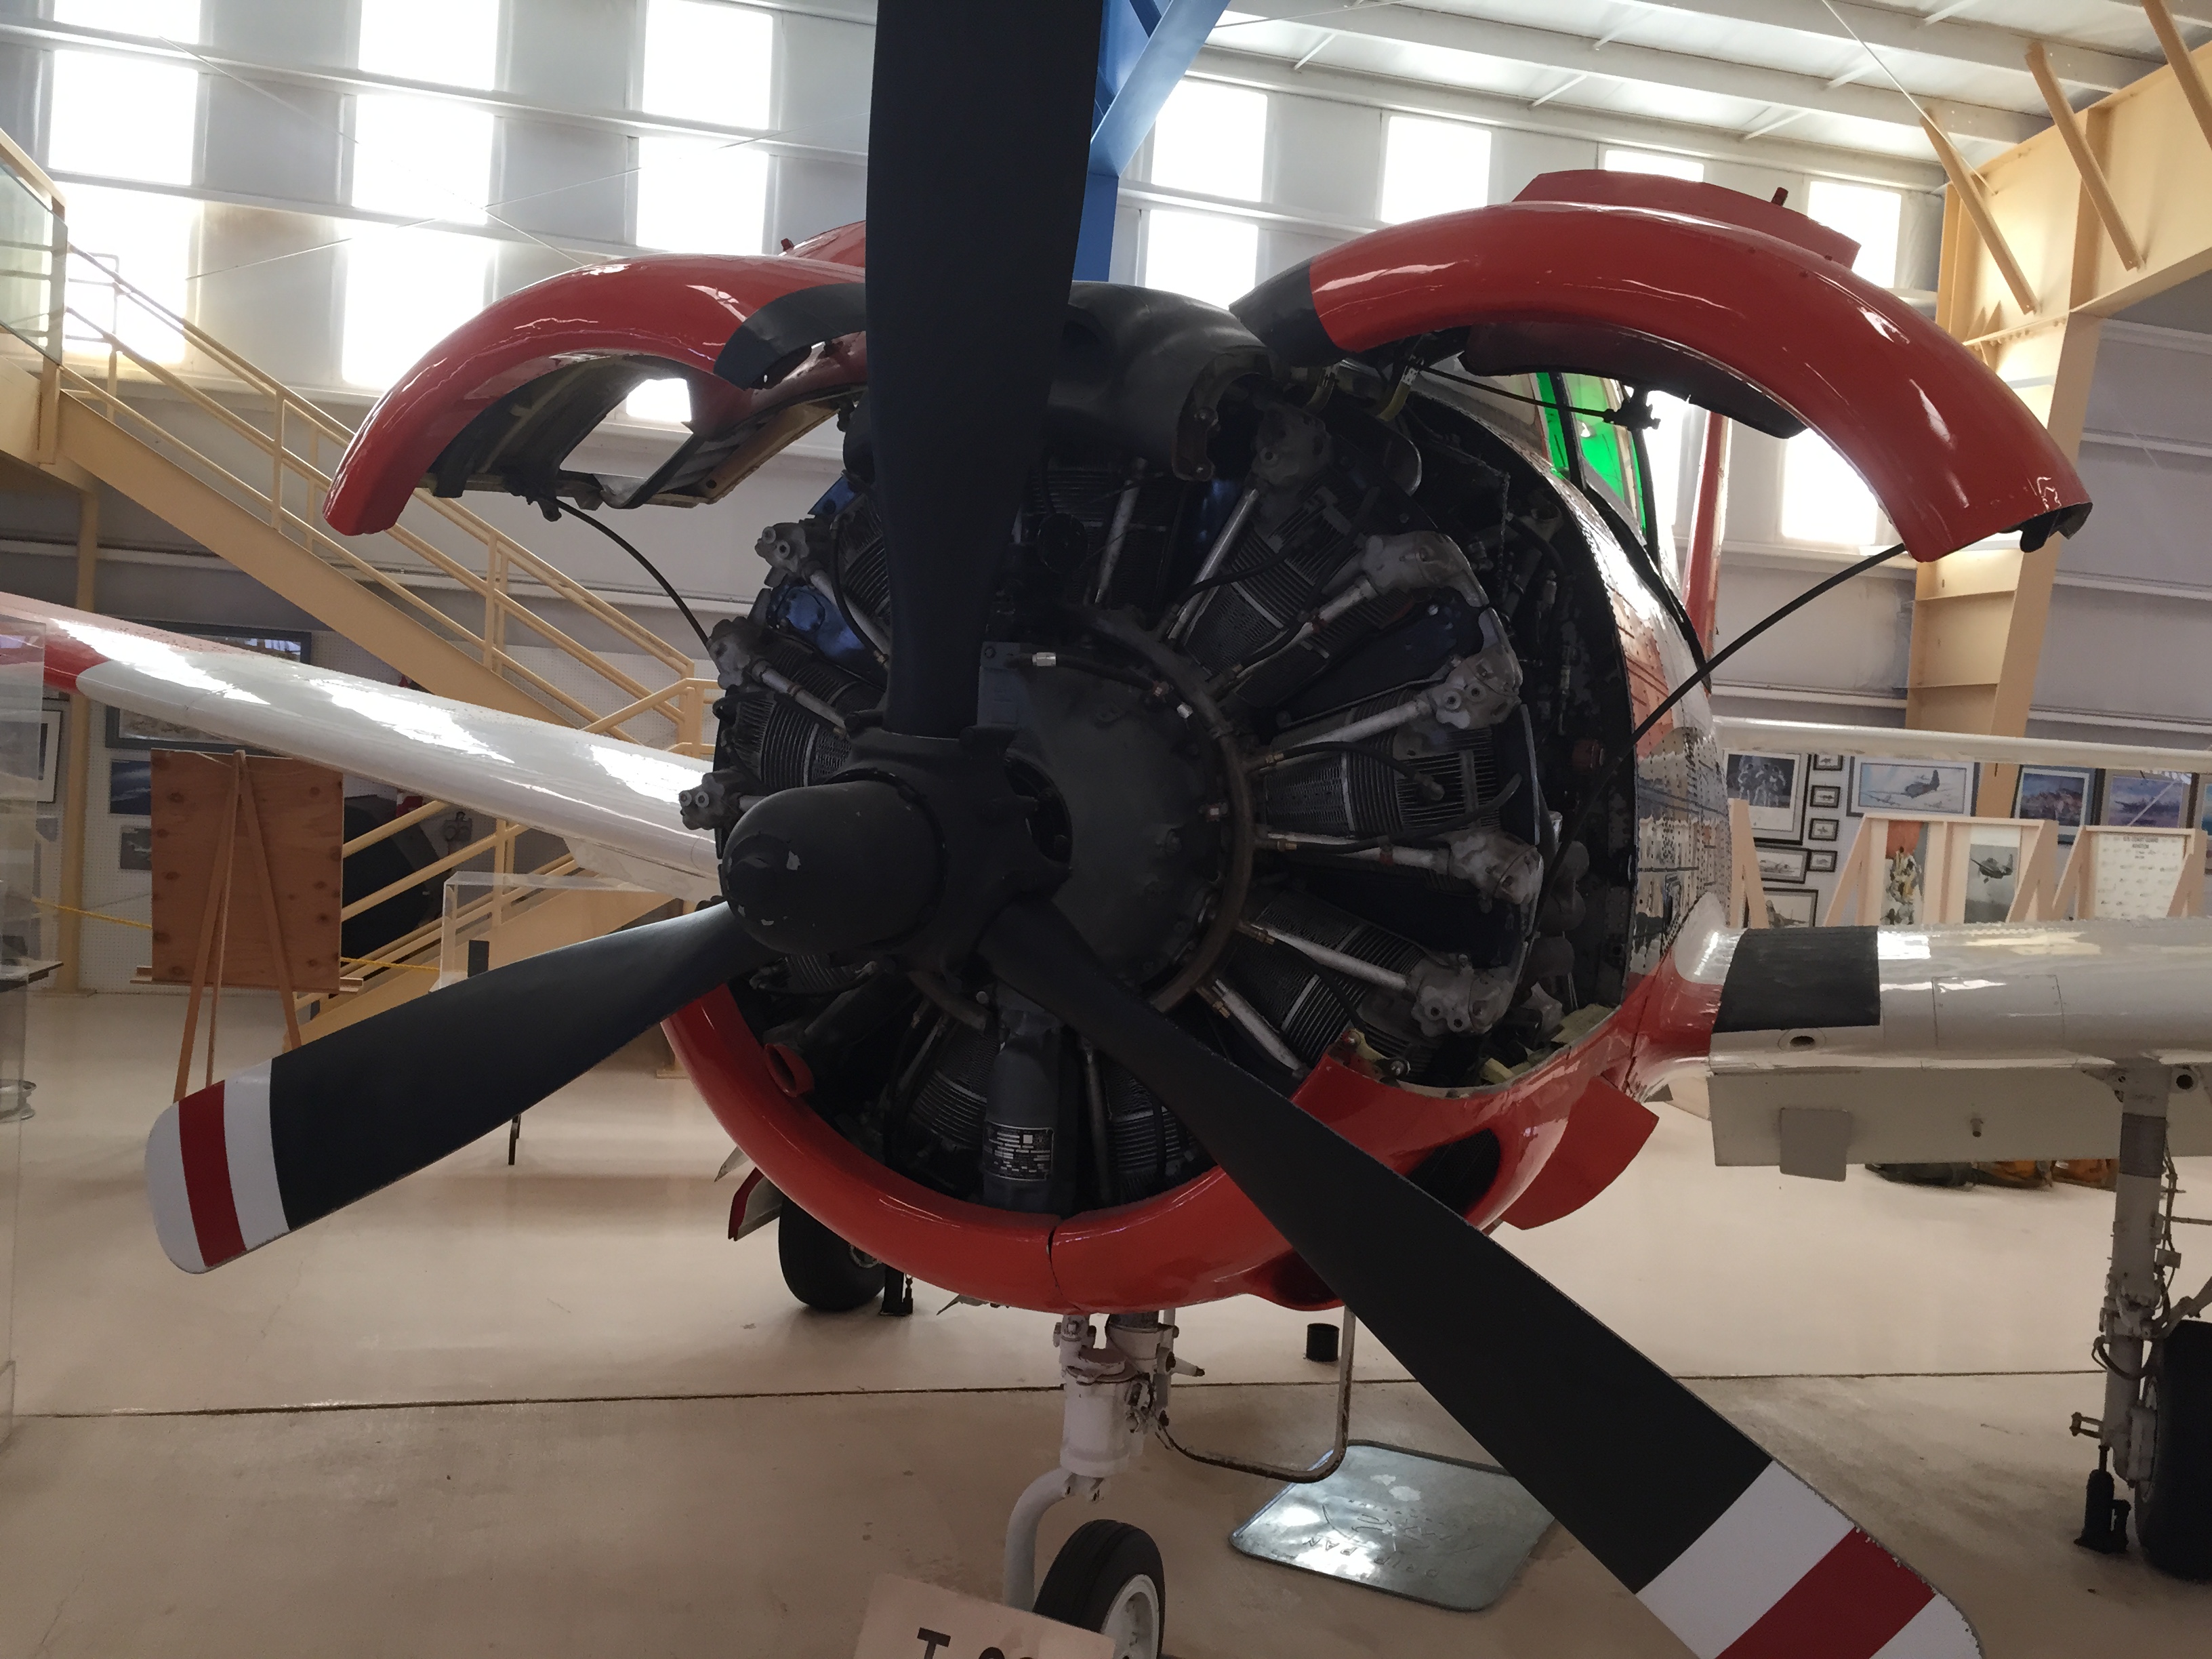 A display of an uncovered airplane engine.